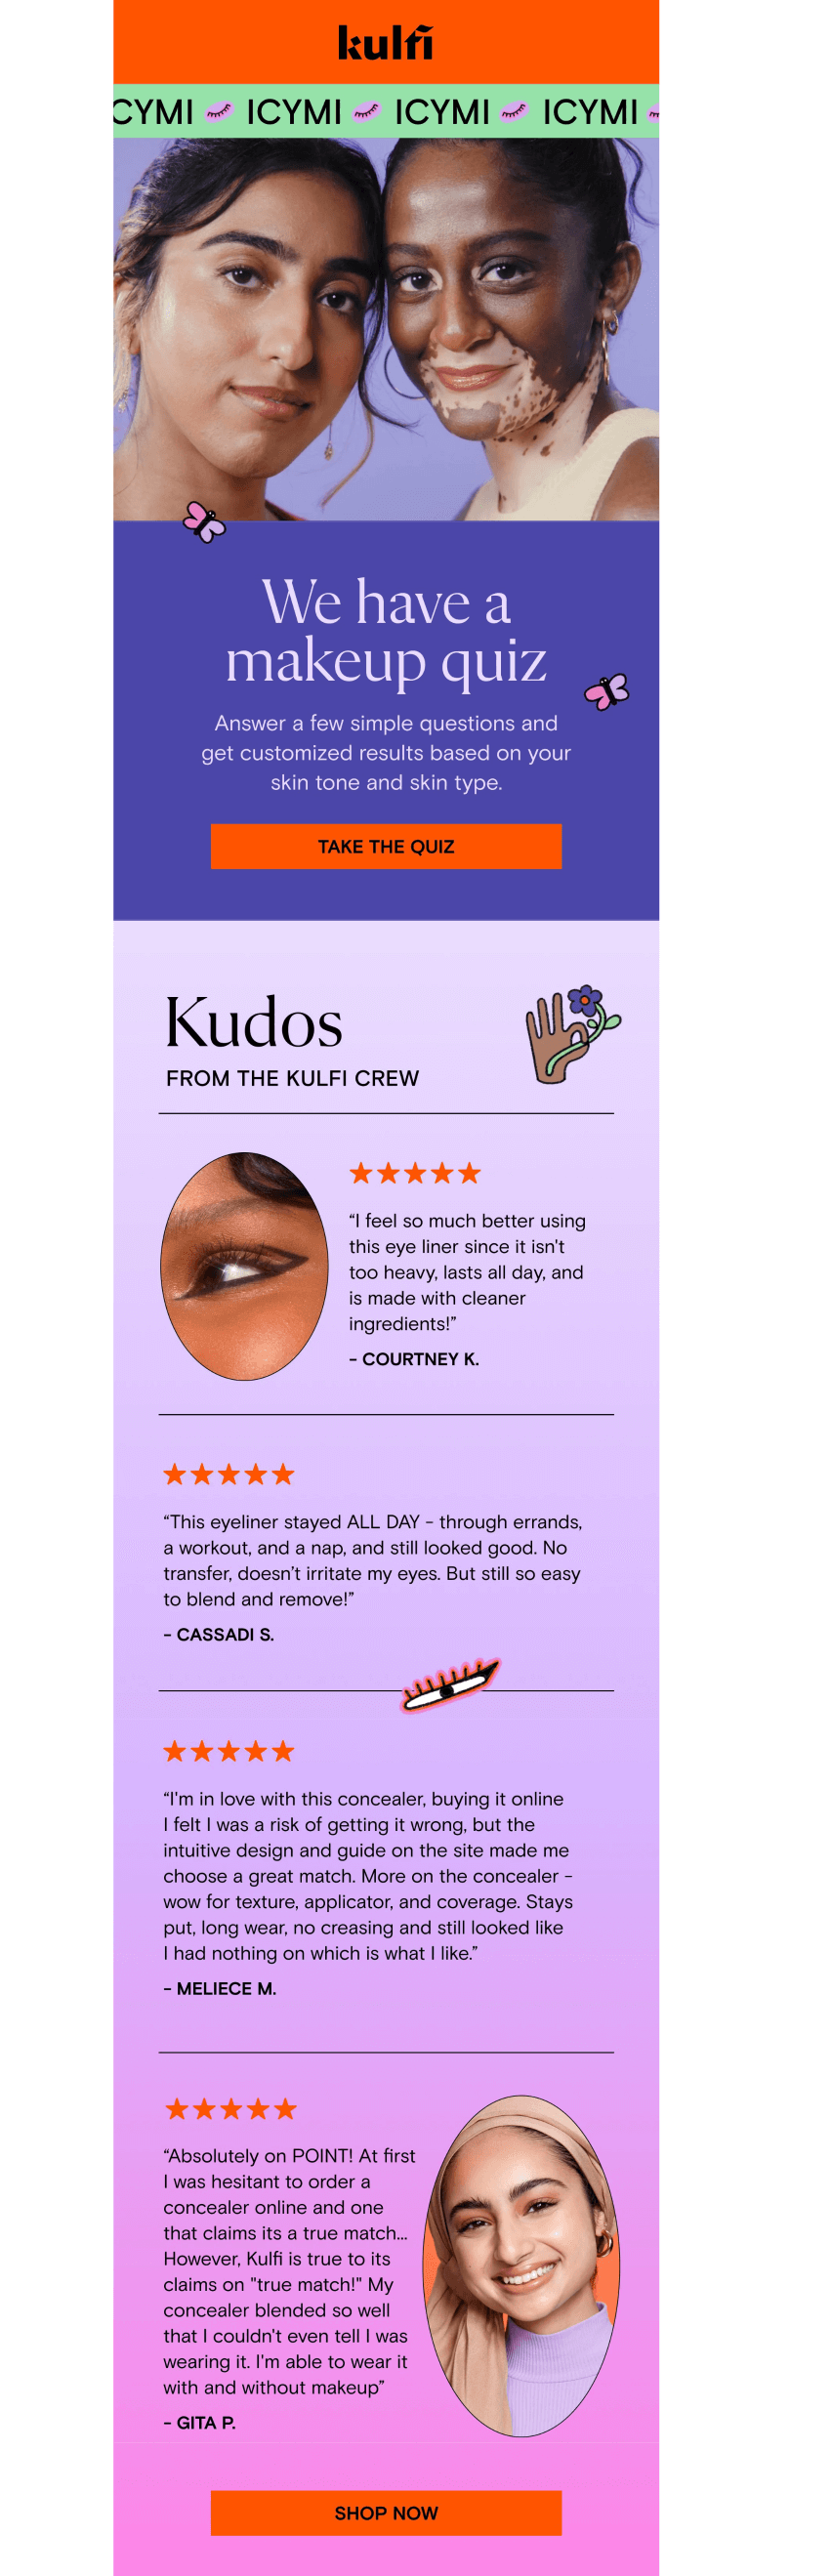 An email from Kulfi Beauty with testimonials